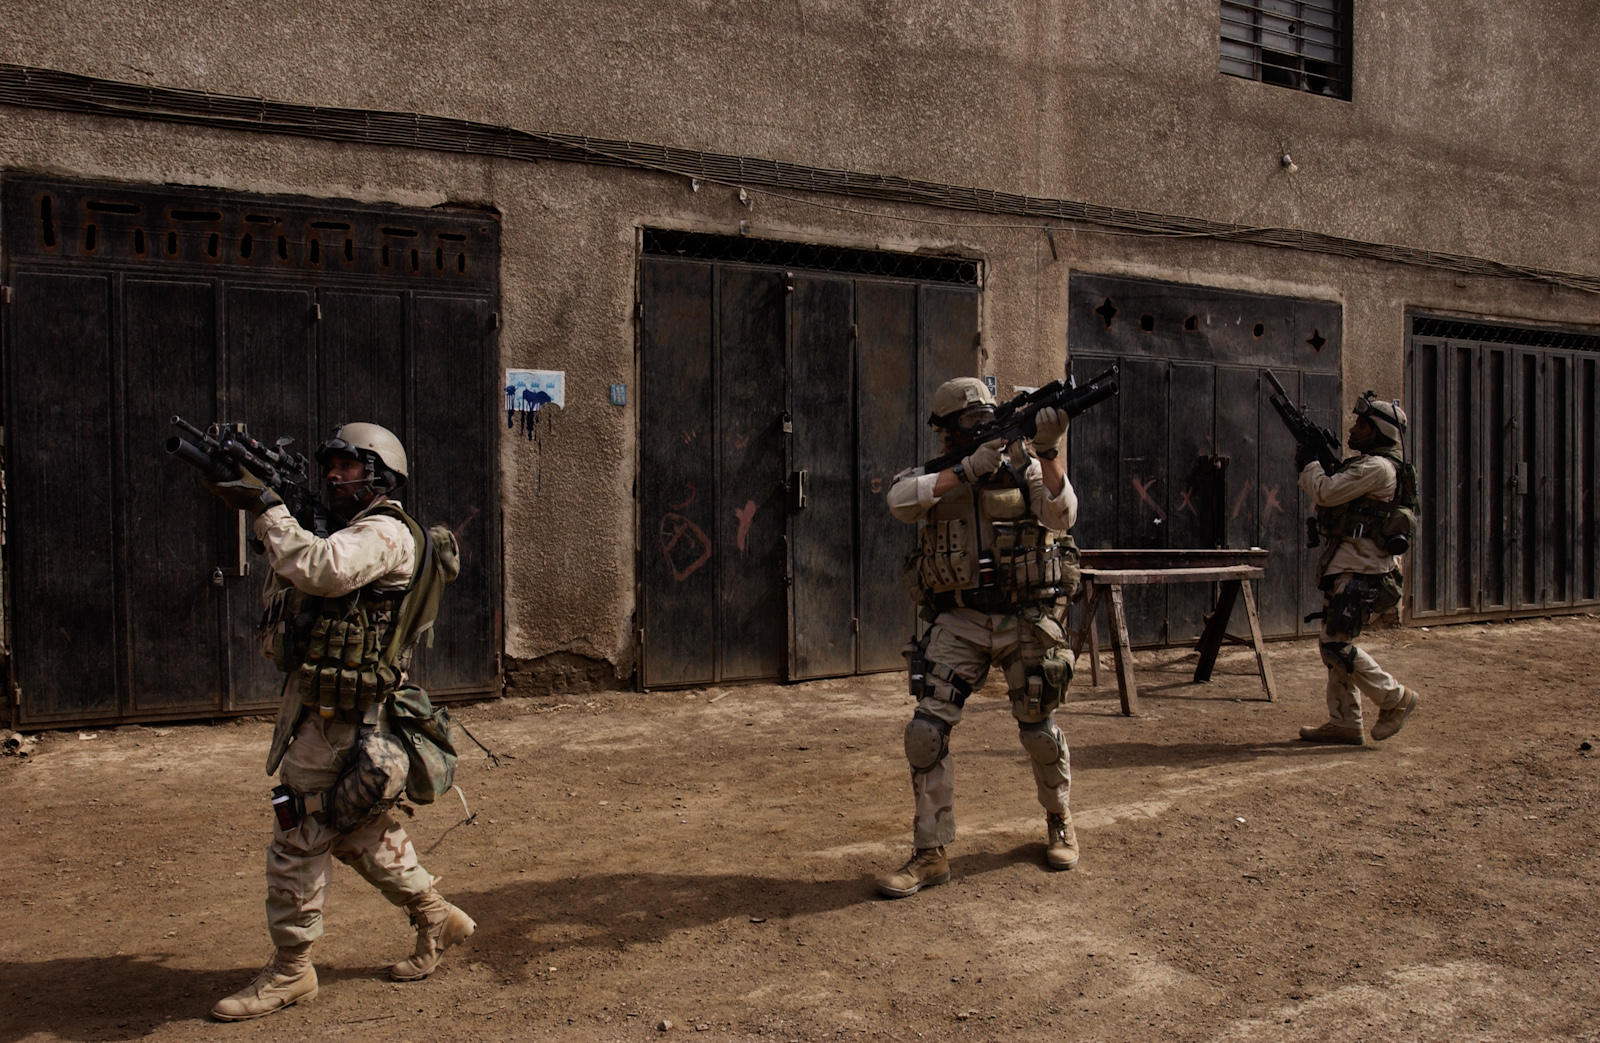 Soldiers search for militants who were targeting U.S. forces in Baghdad, Iraq, April 12, 2003.